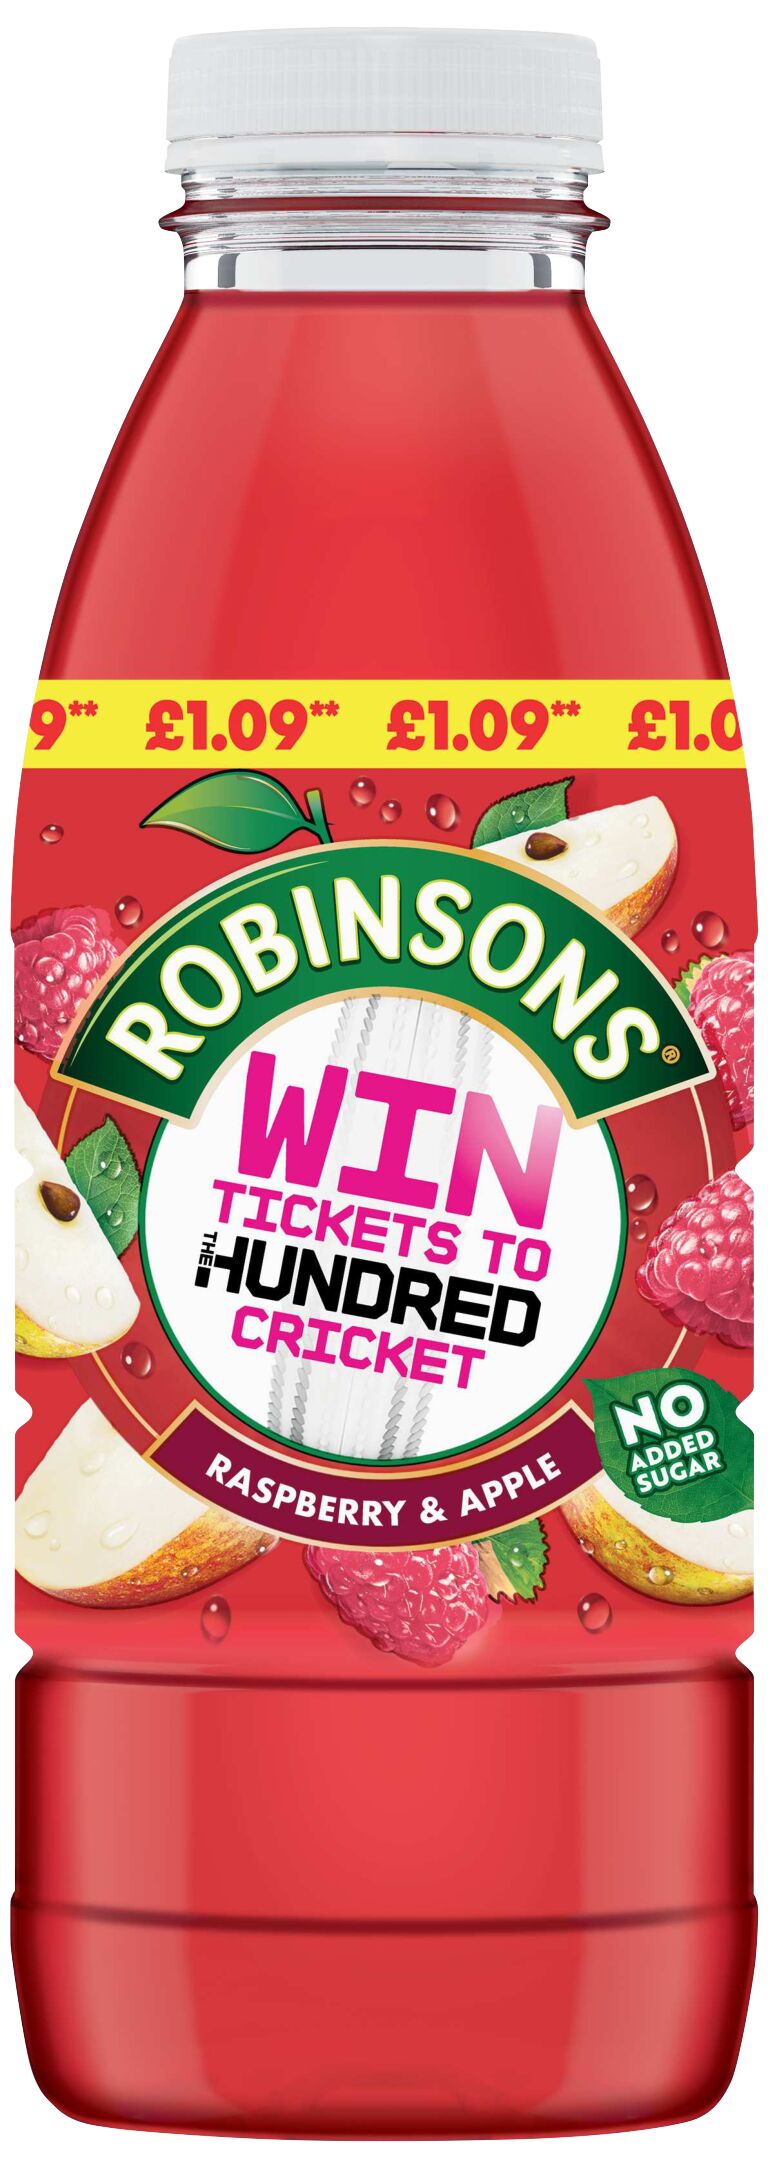 Robinsons ready to drink’s on-pack promotion with The Hundred returns